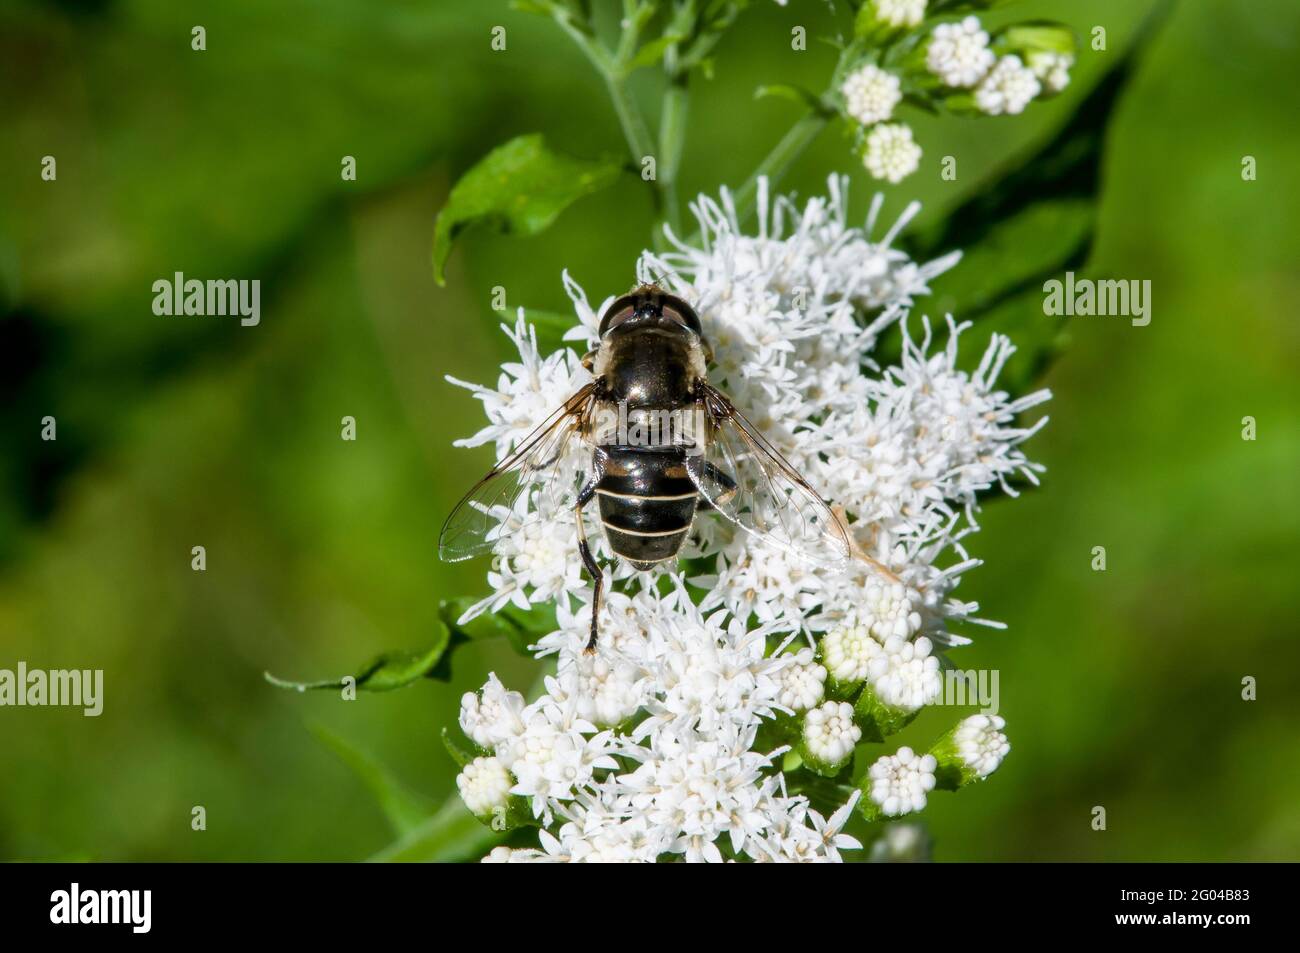 Vadnais Heights, Minnesota. John H. Allison forest. Top view of a Black-shouldered Drone Fly, Eristalis dimidiata feeding on White Snakeroot flower. Stock Photo